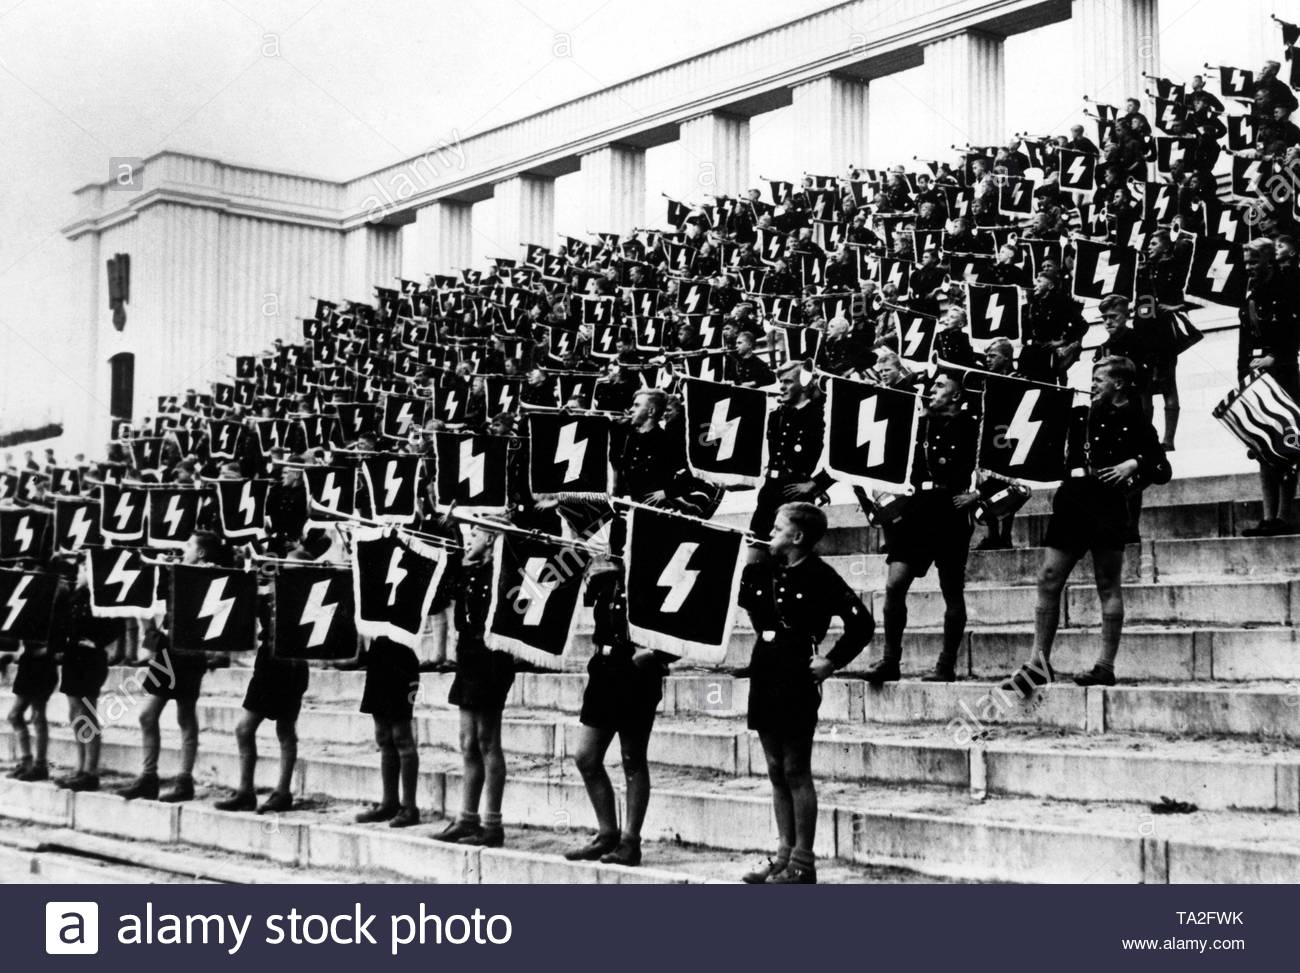 trumpeters-of-the-deutsches-jungvolk-are-blowing-their-trumpets-at-the-nuremberg-rally-of-the-nsdap-on-the-rally-grounds-TA2FWK.jpg